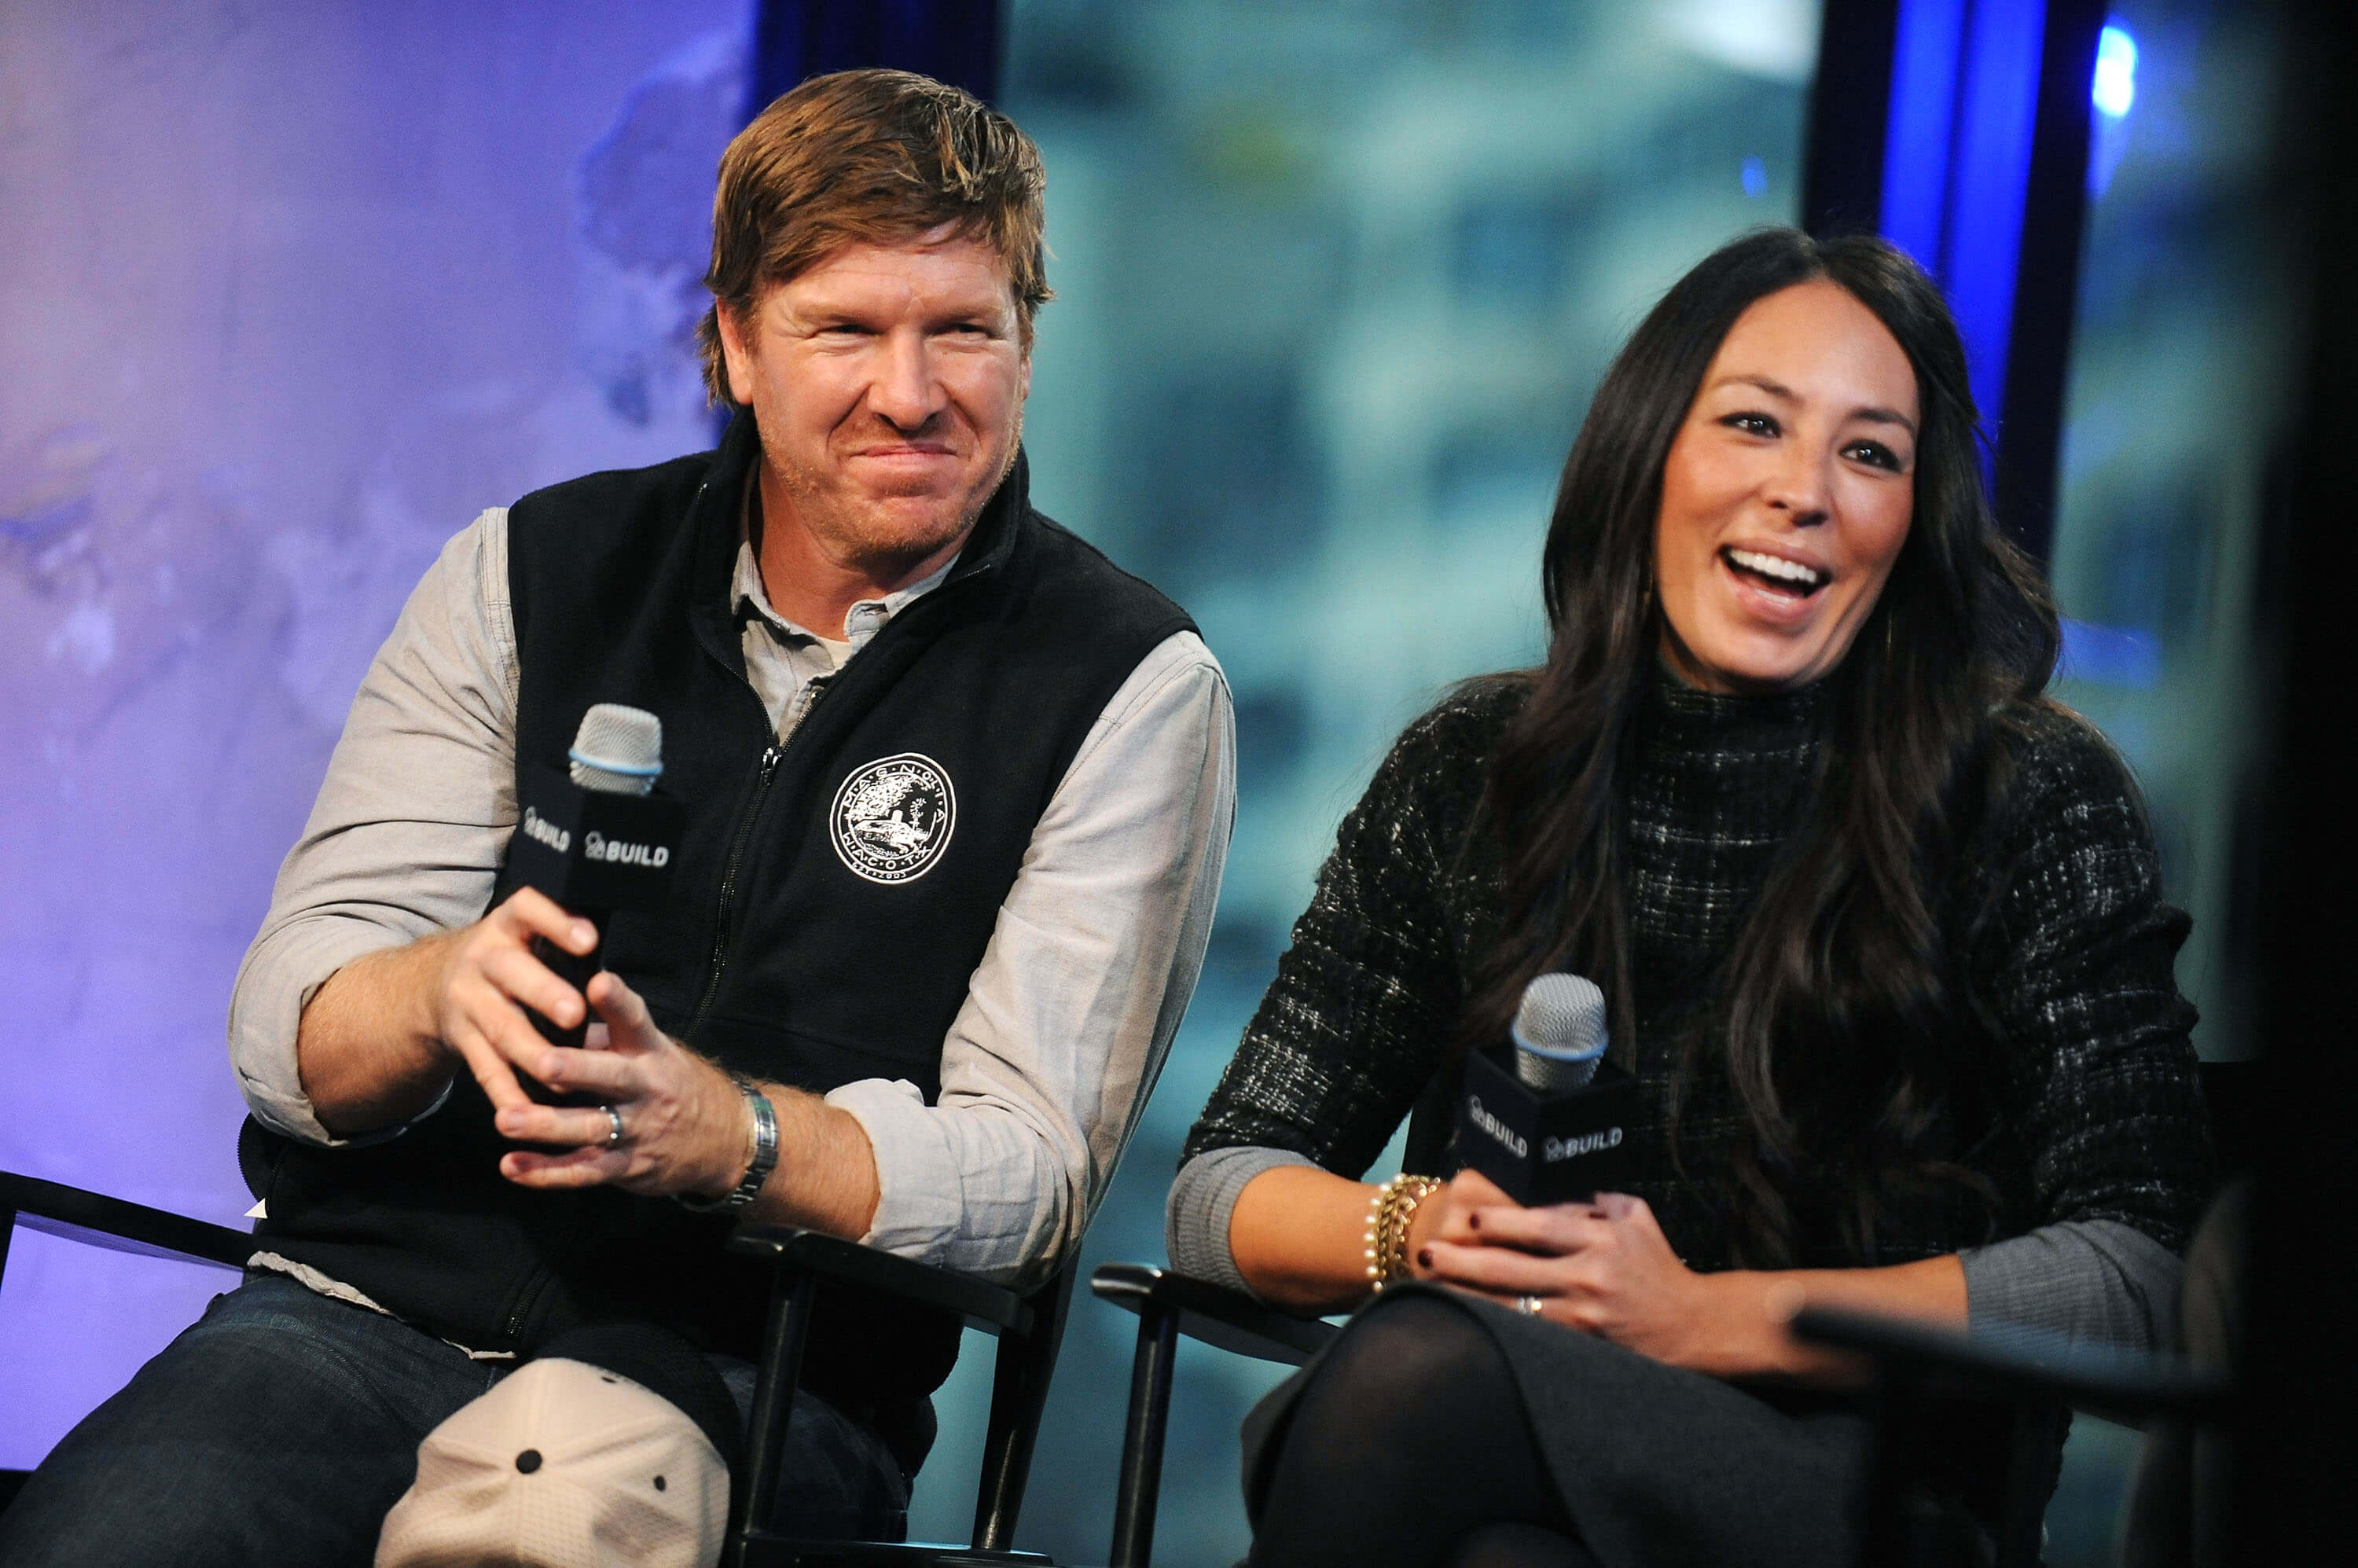 'Fixer Upper' stars Chip and Joanna Gaines on stage during an interview